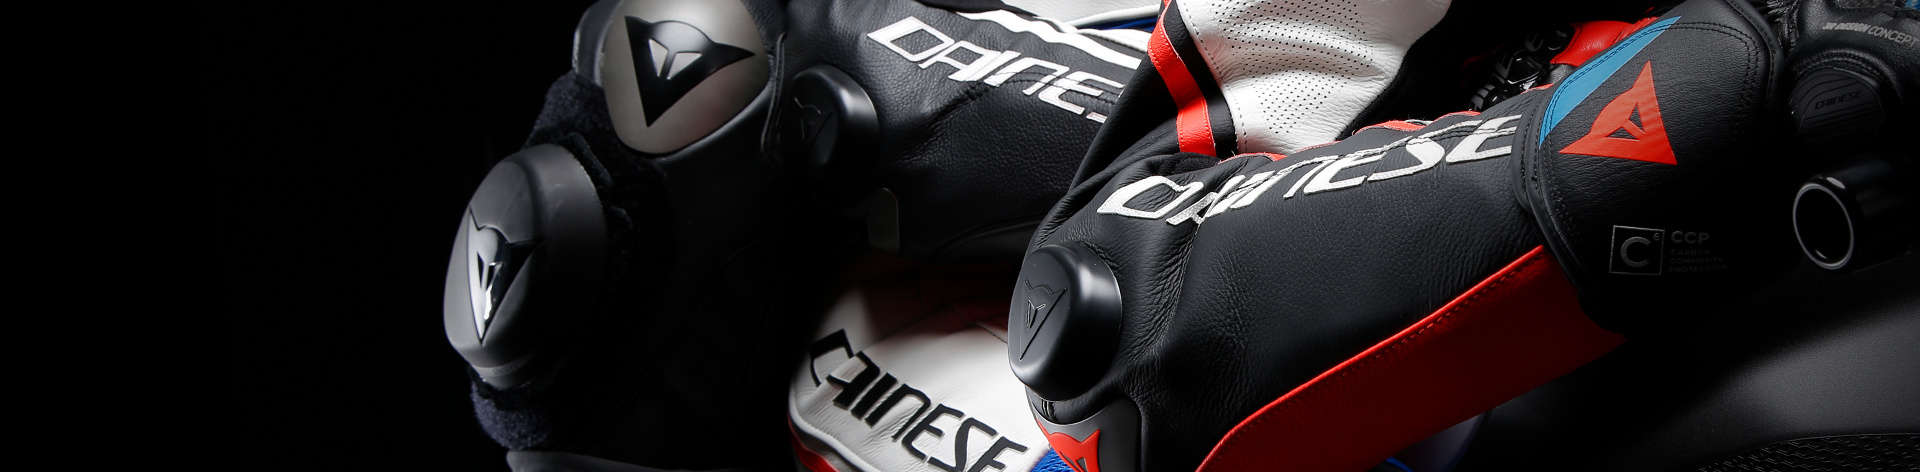 Dainese Motorbike Protection Knees